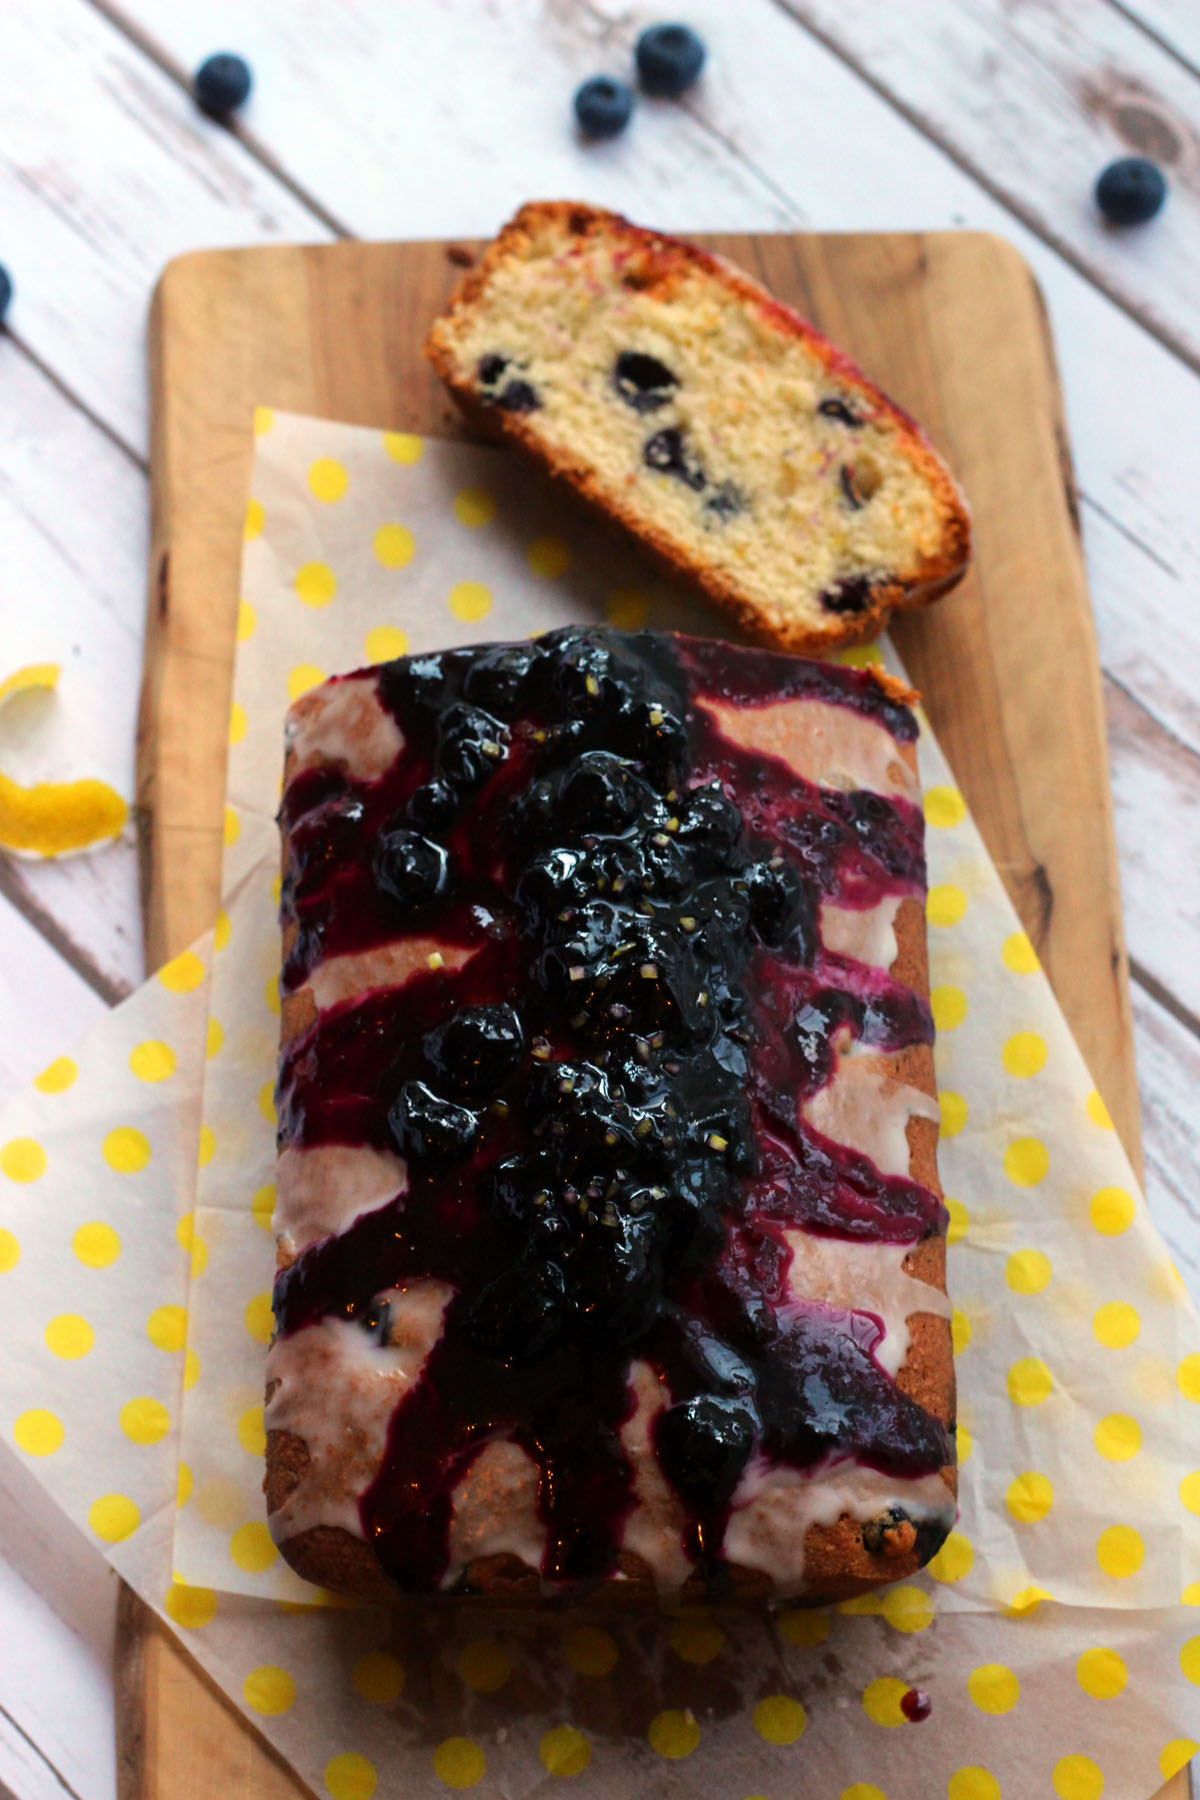 Zesty Lemon and Blueberry Madeira Cake inspired by the Great British Bake Off